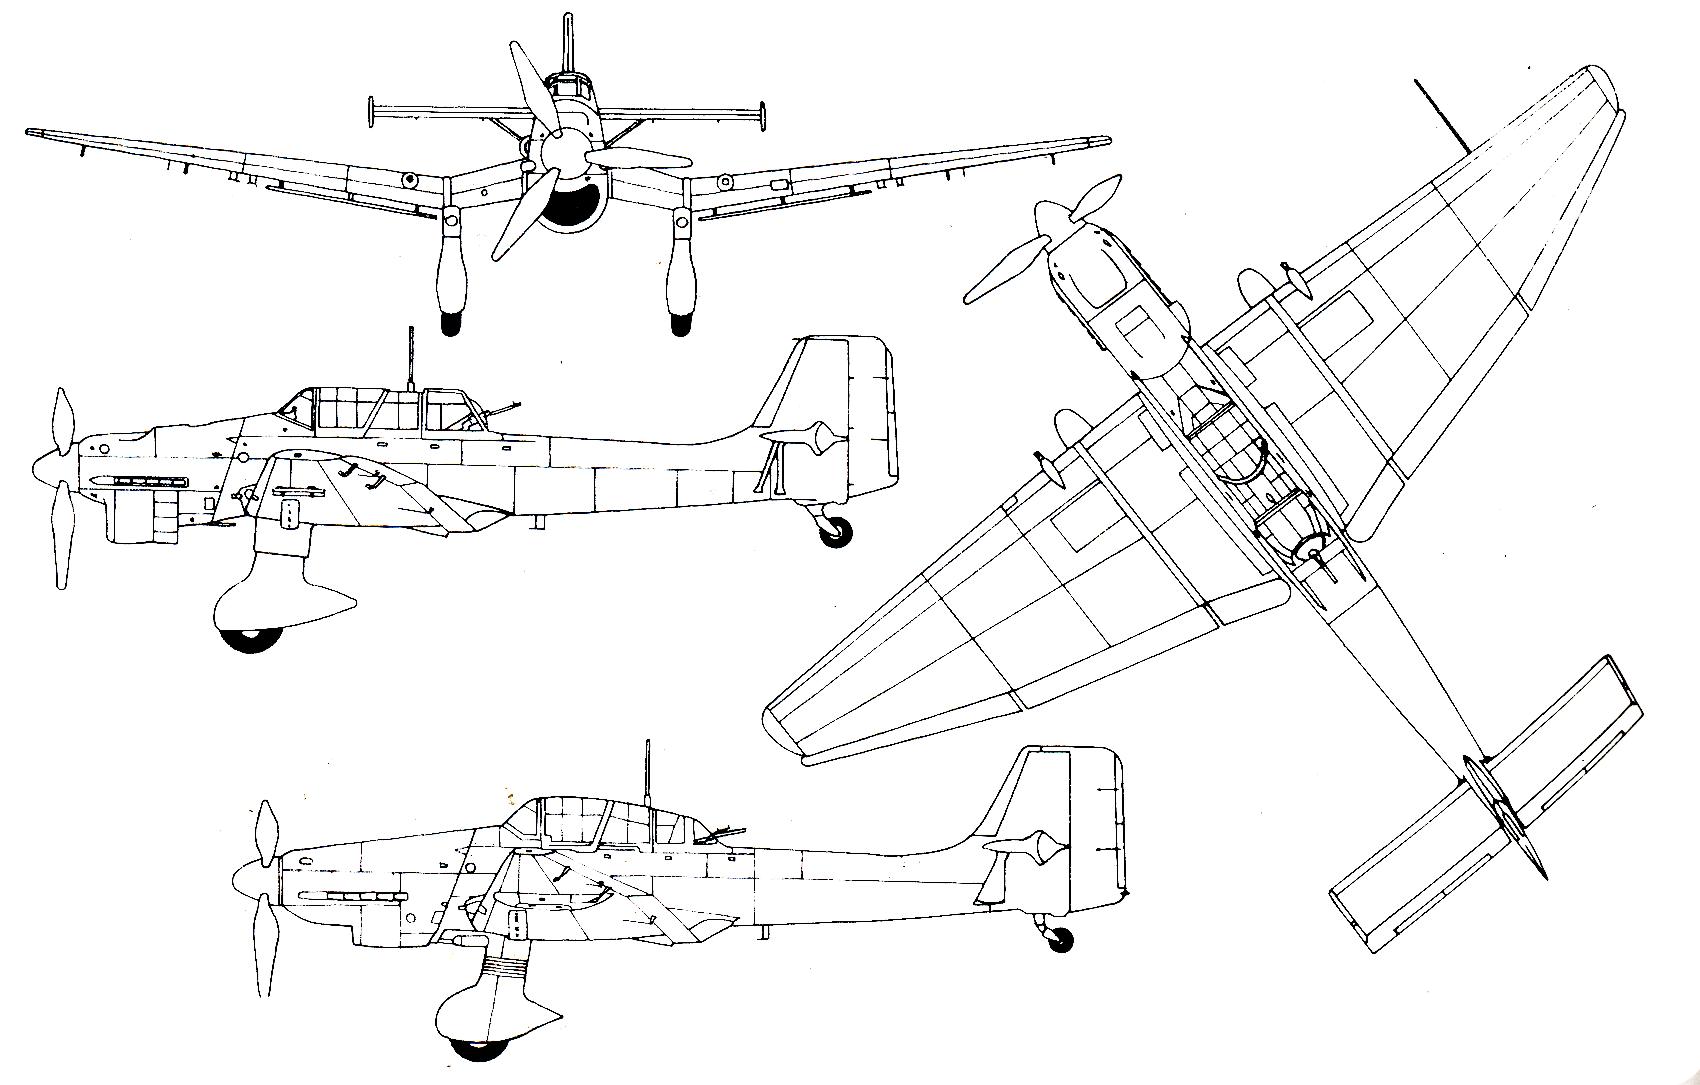 an airplane diagram with parts for the tail